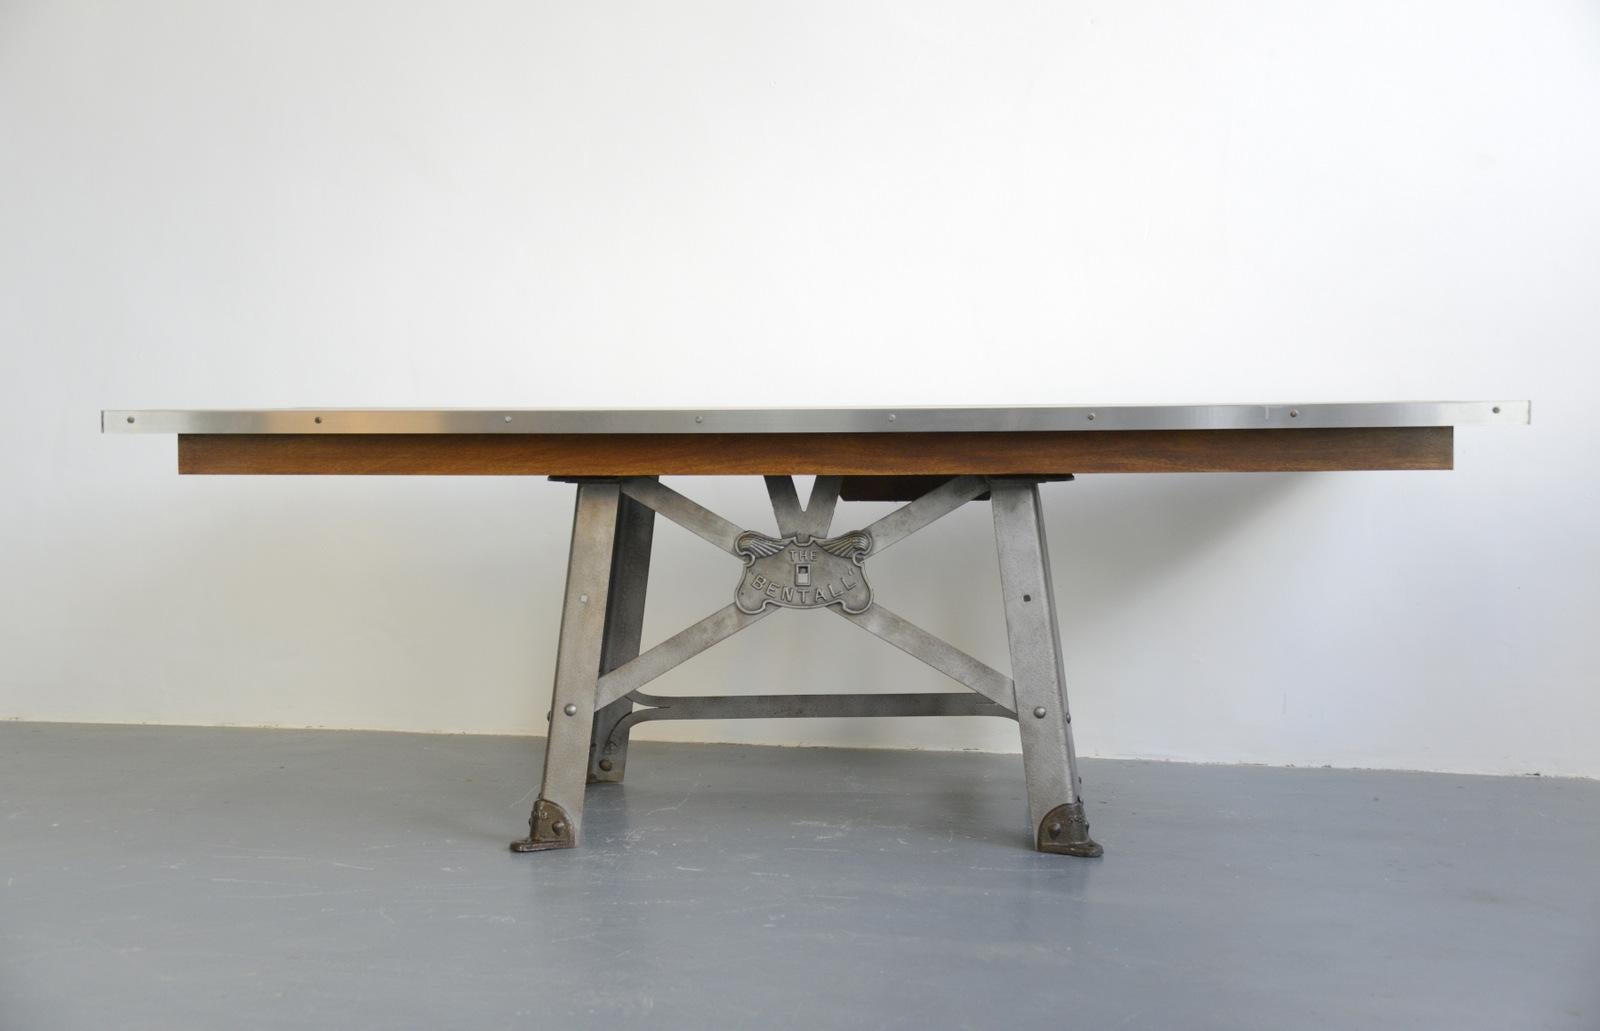 Large English industrial table by Benthall circa 1910

- Will seat 8-10
- Cast iron base
- Beautiful shield style logo 